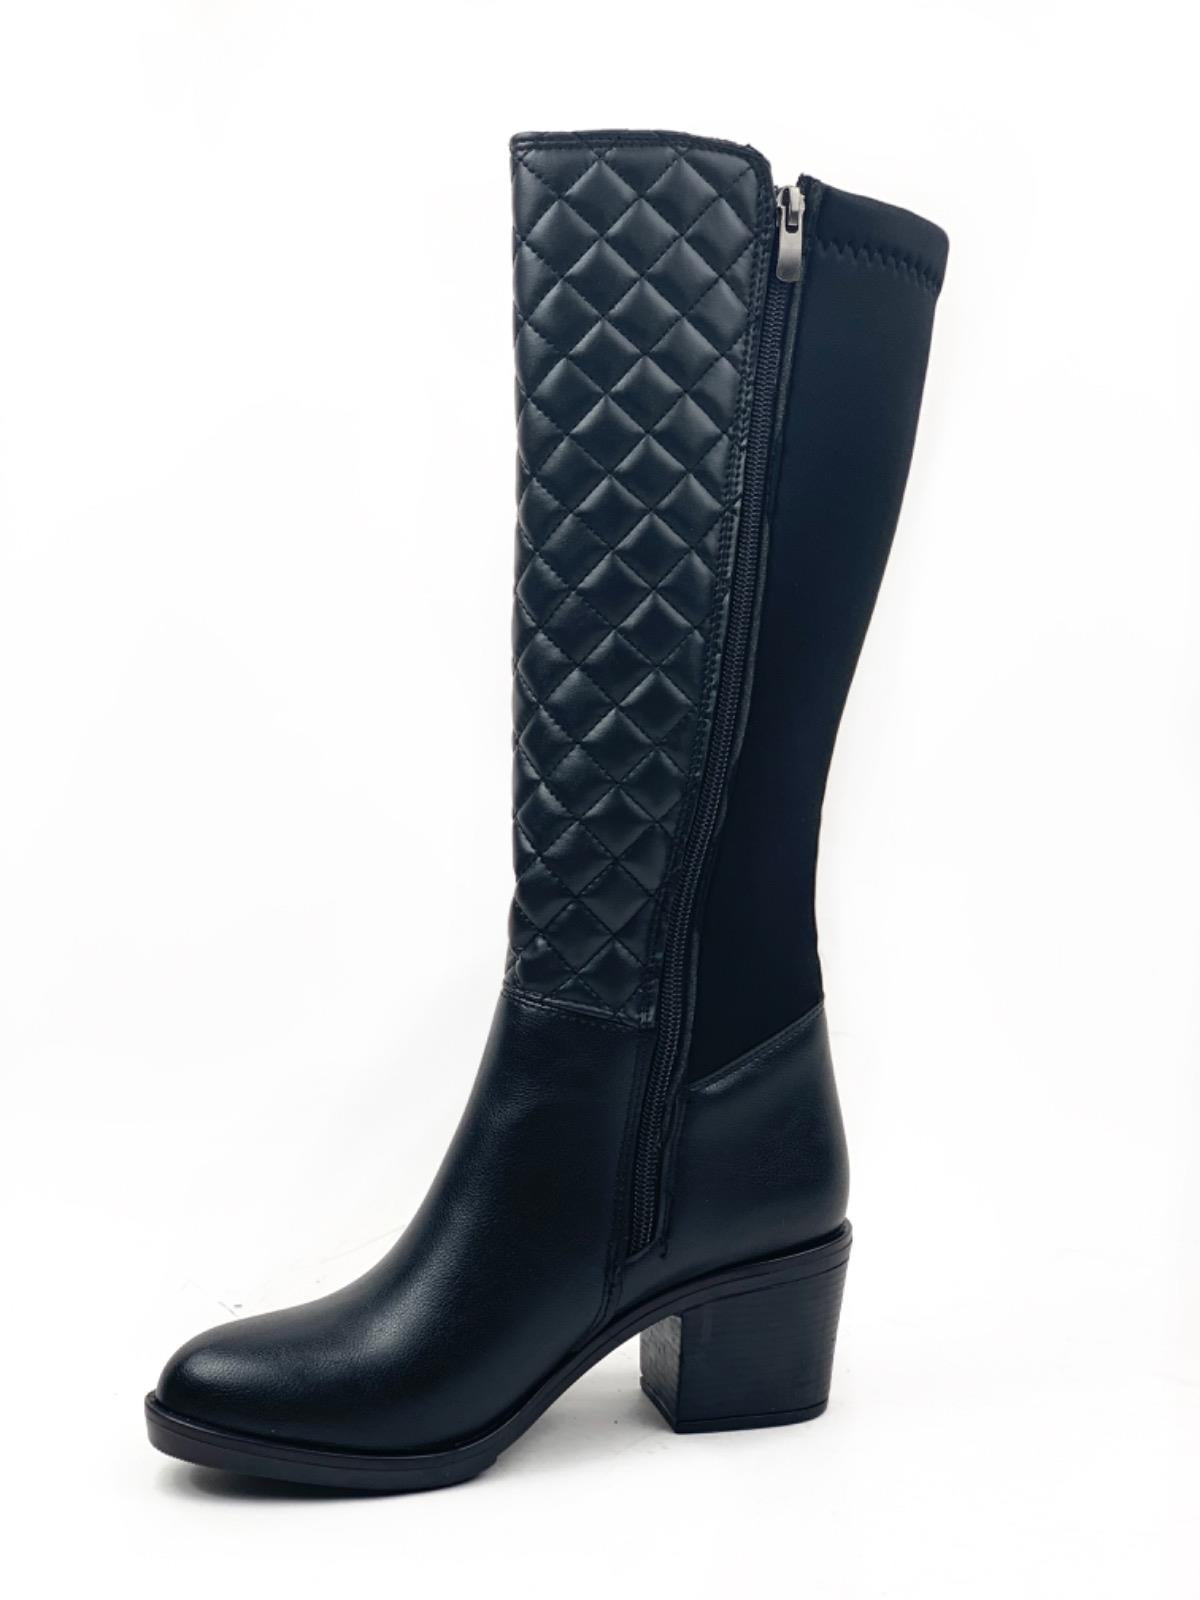 Women's Black Kapitun Patterned Heeled Stretch Boots - STREETMODE™